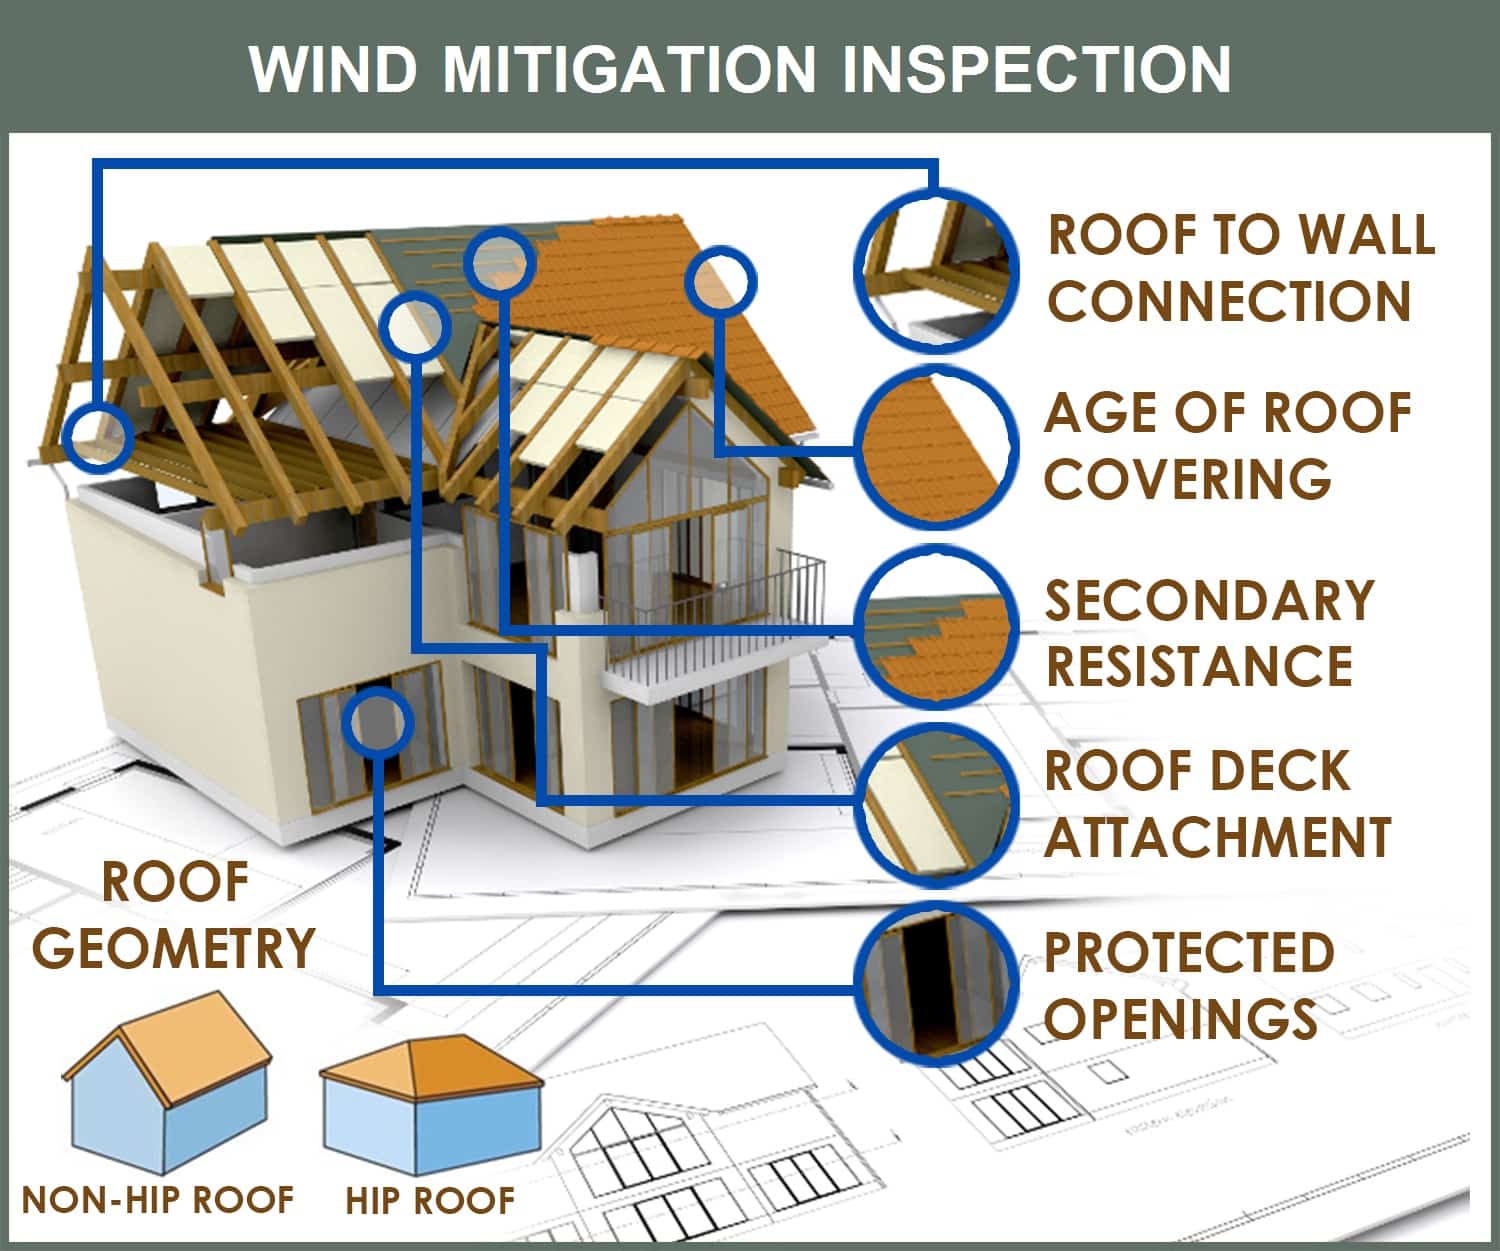 Bracing for the Storm: The Importance of Wind Mitigation Inspections for Marco Island Homeowners